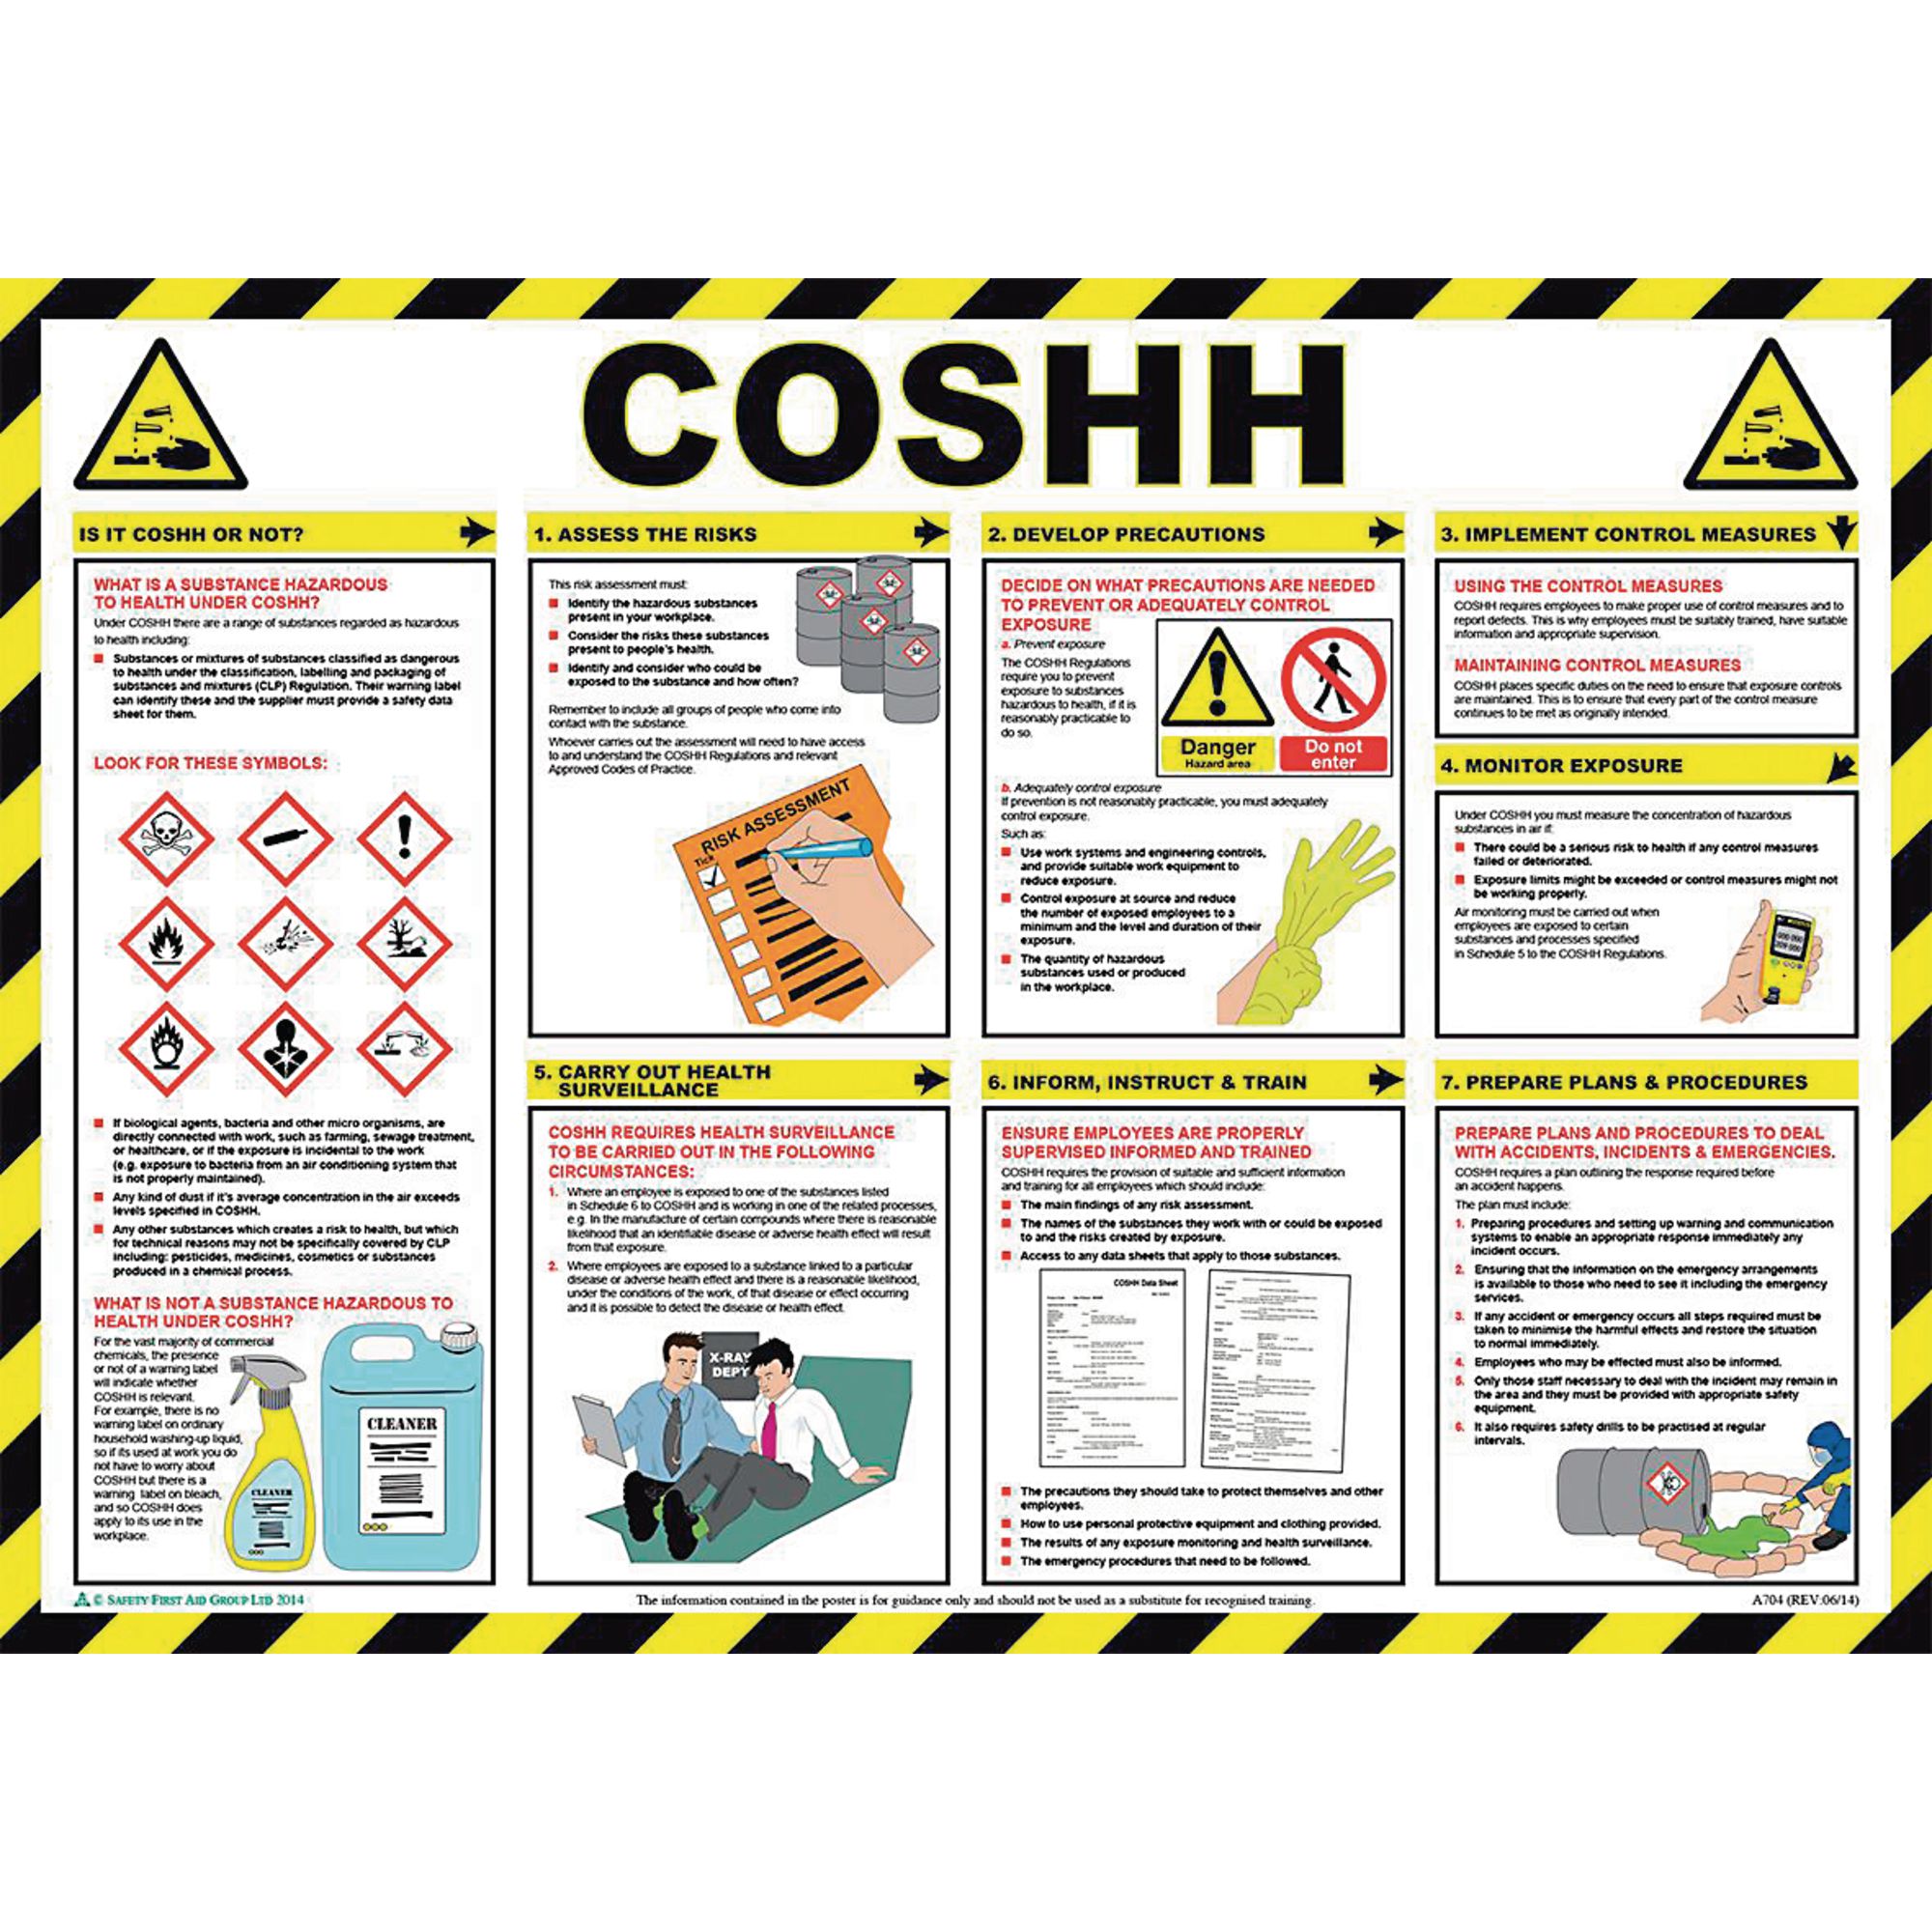 A704 Poster Coshh Guidance 